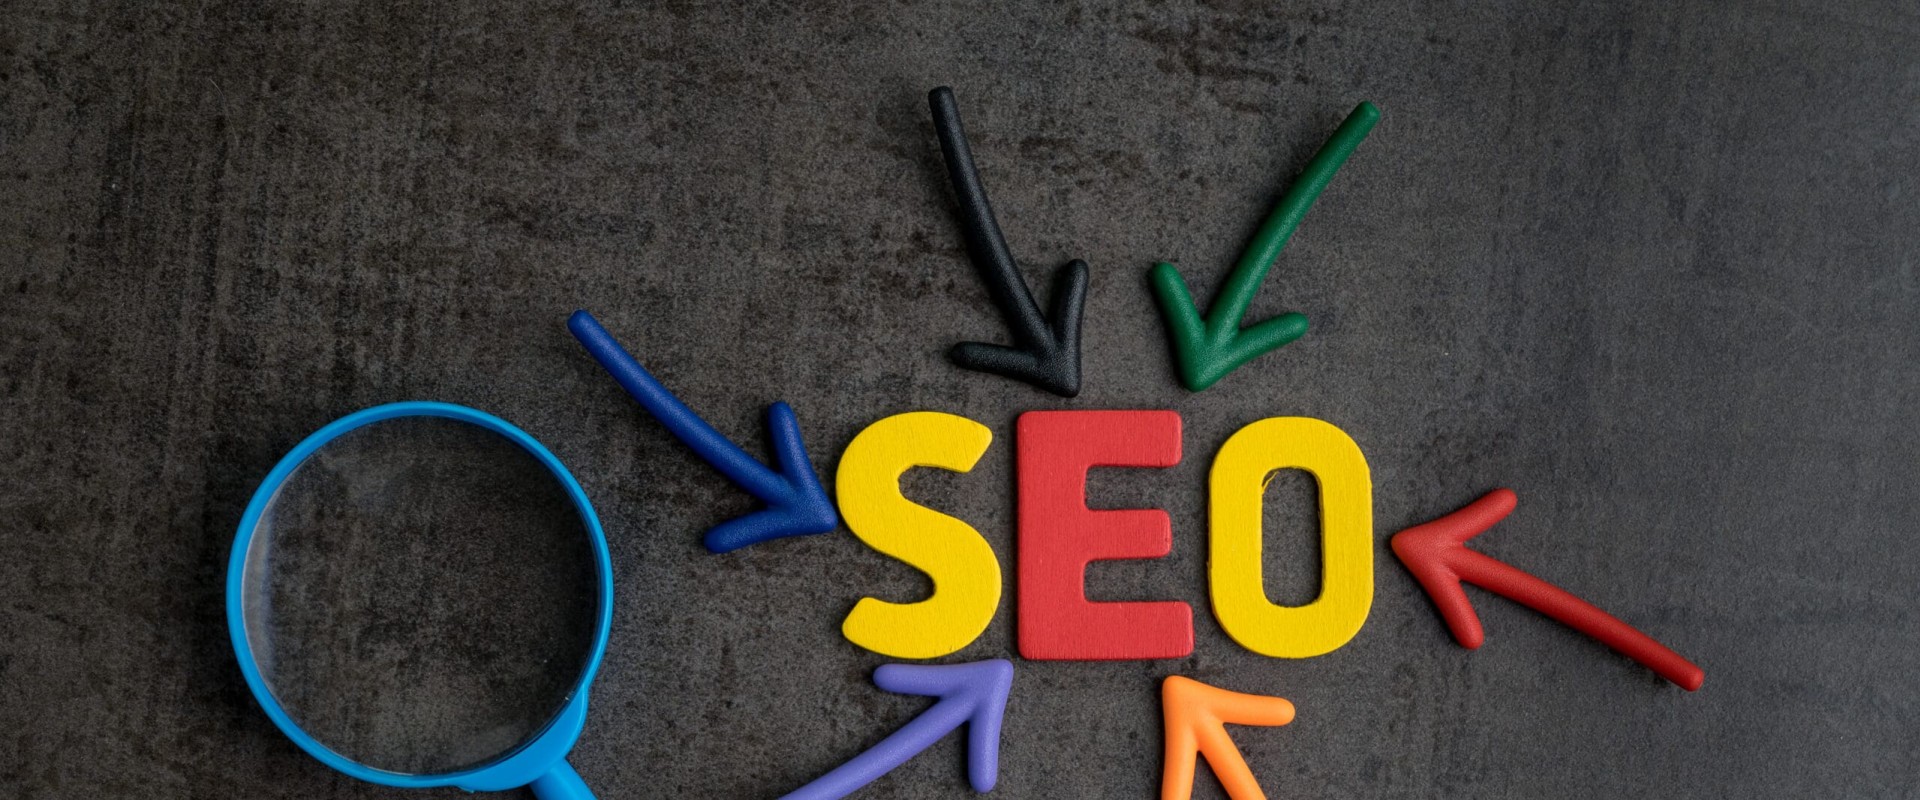 Which type seo is best?